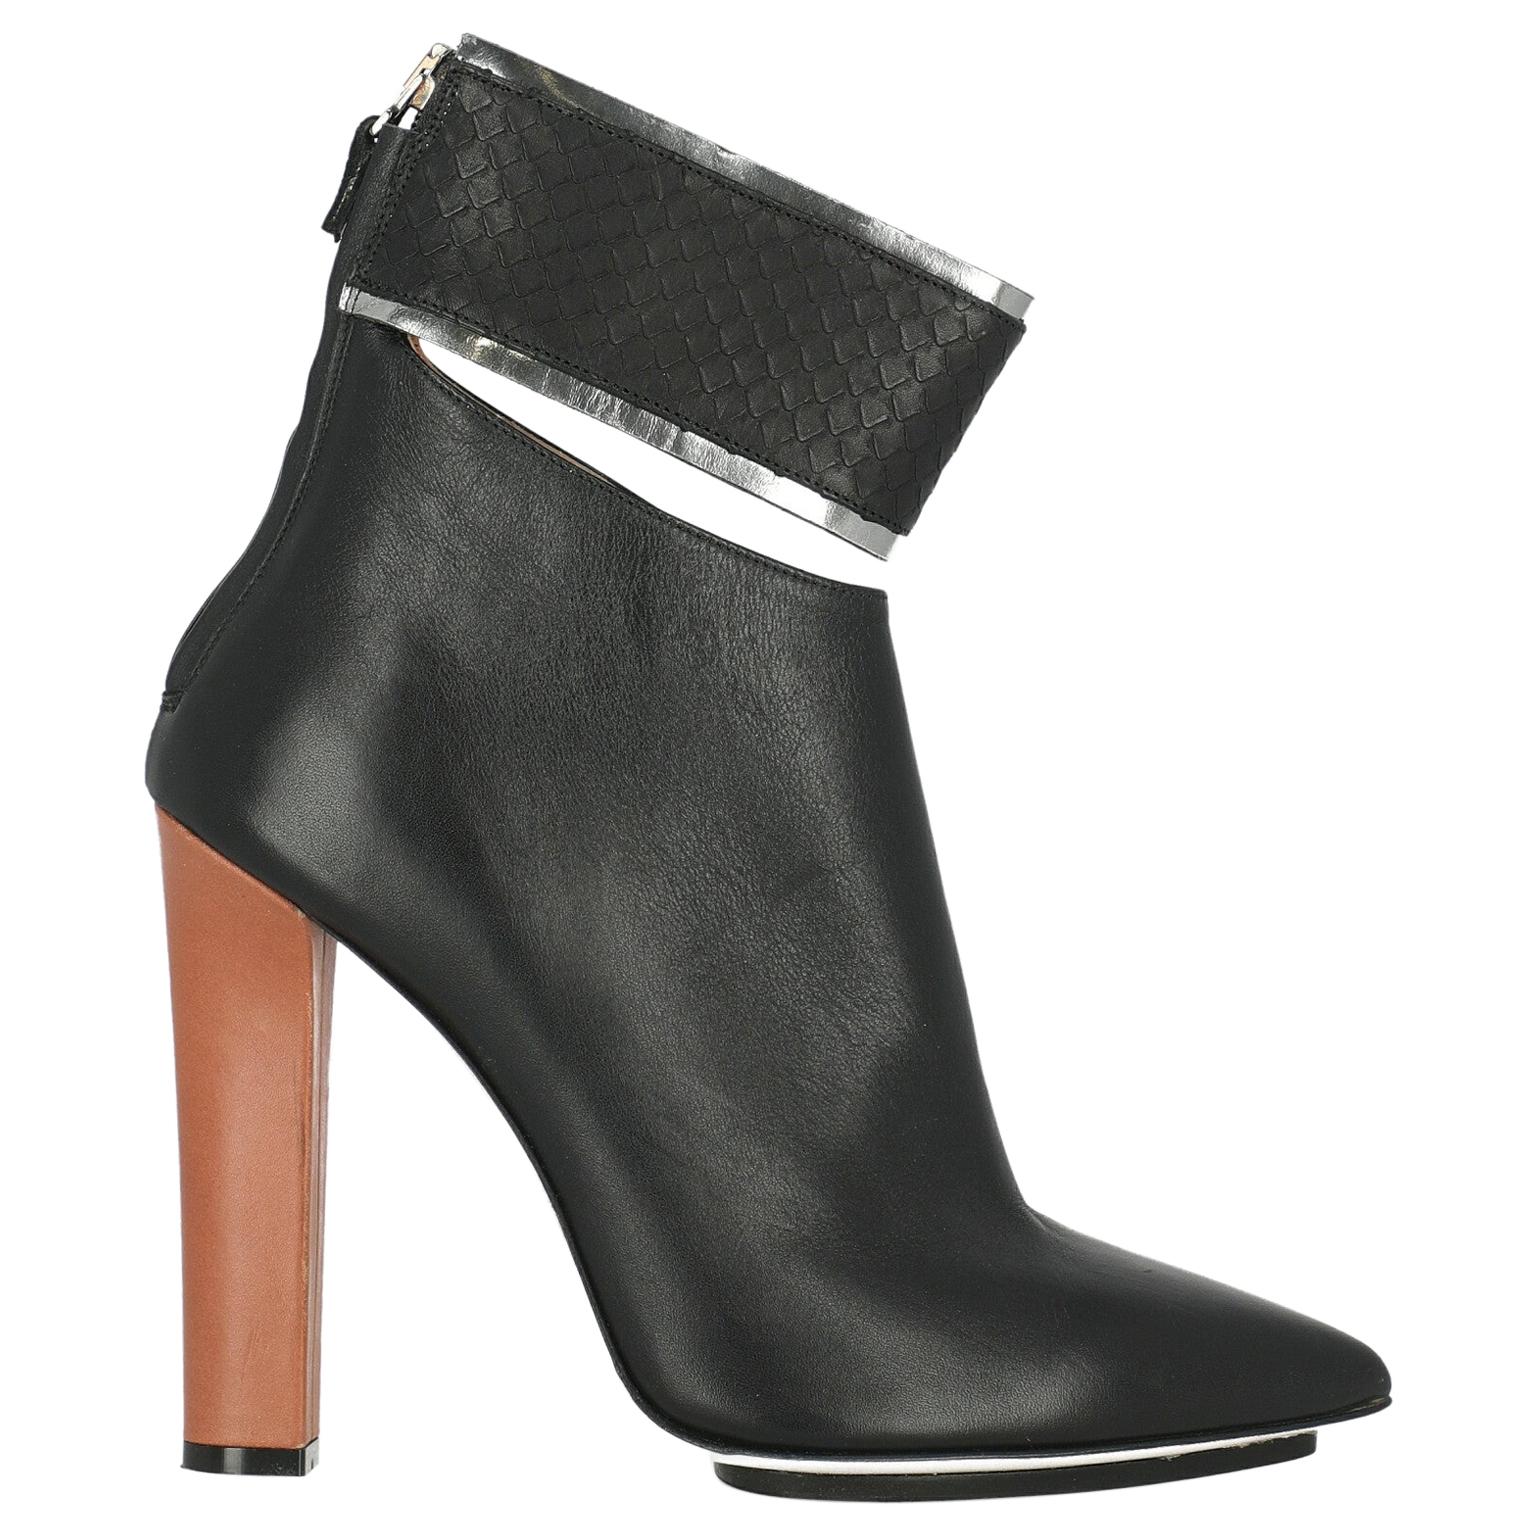 Gianfranco Ferre Woman Ankle boots Black Leather IT 40 For Sale